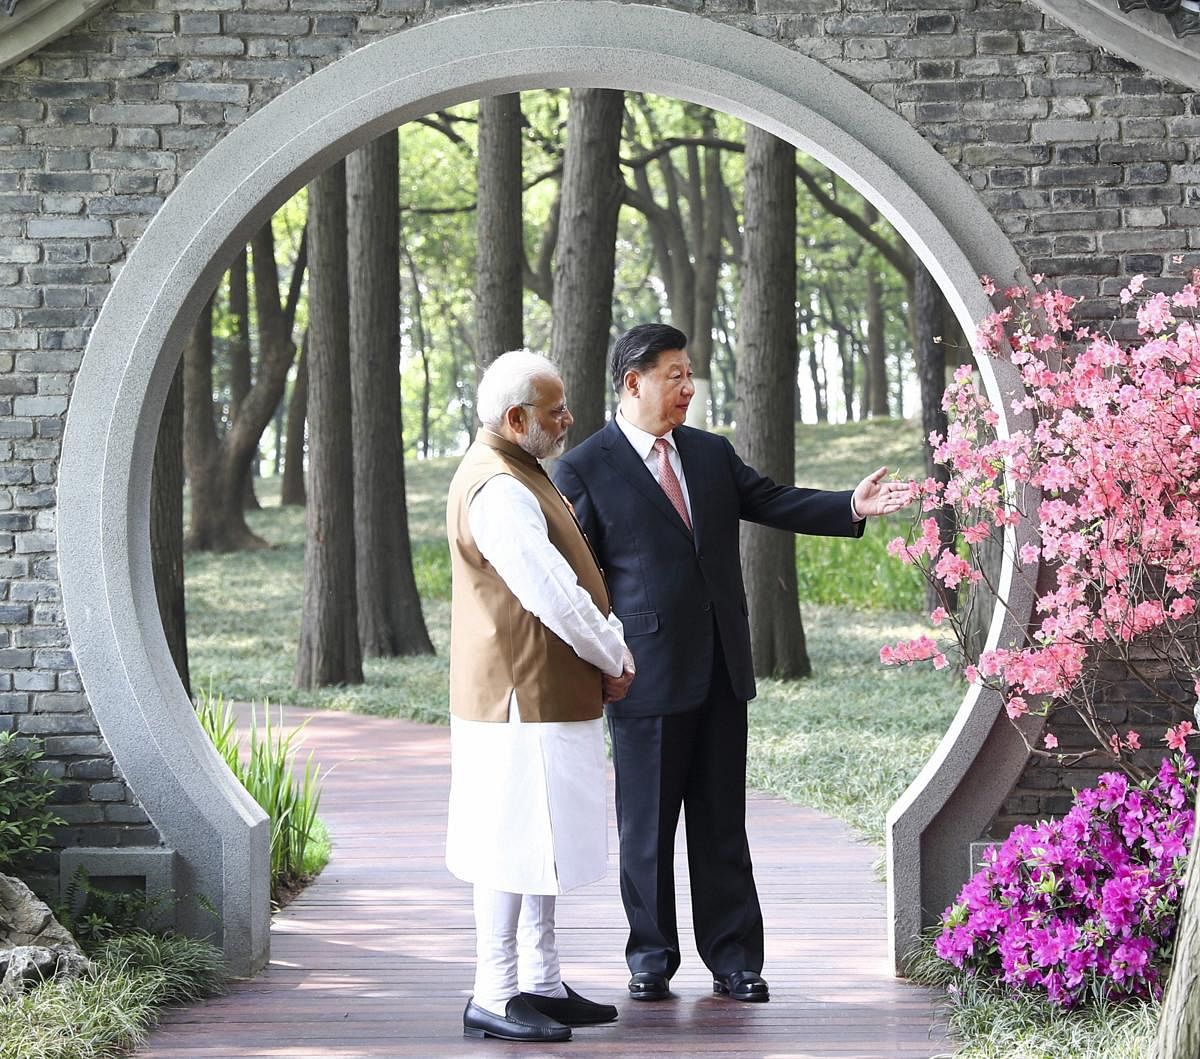 In this photo released by China's Xinhua News Agency, Indian Prime Minister Narendra Modi, left, and Chinese President Xi Jinping talk at a garden in Wuhan in central China's Hubei Province, Saturday, April 28, 2018. The leaders of China and India stressed the importance of close ties in talks Saturday, against the background of their rivalry for leadership in Asia and the potential for cooperation on economic and security matters. (AP/PTI)